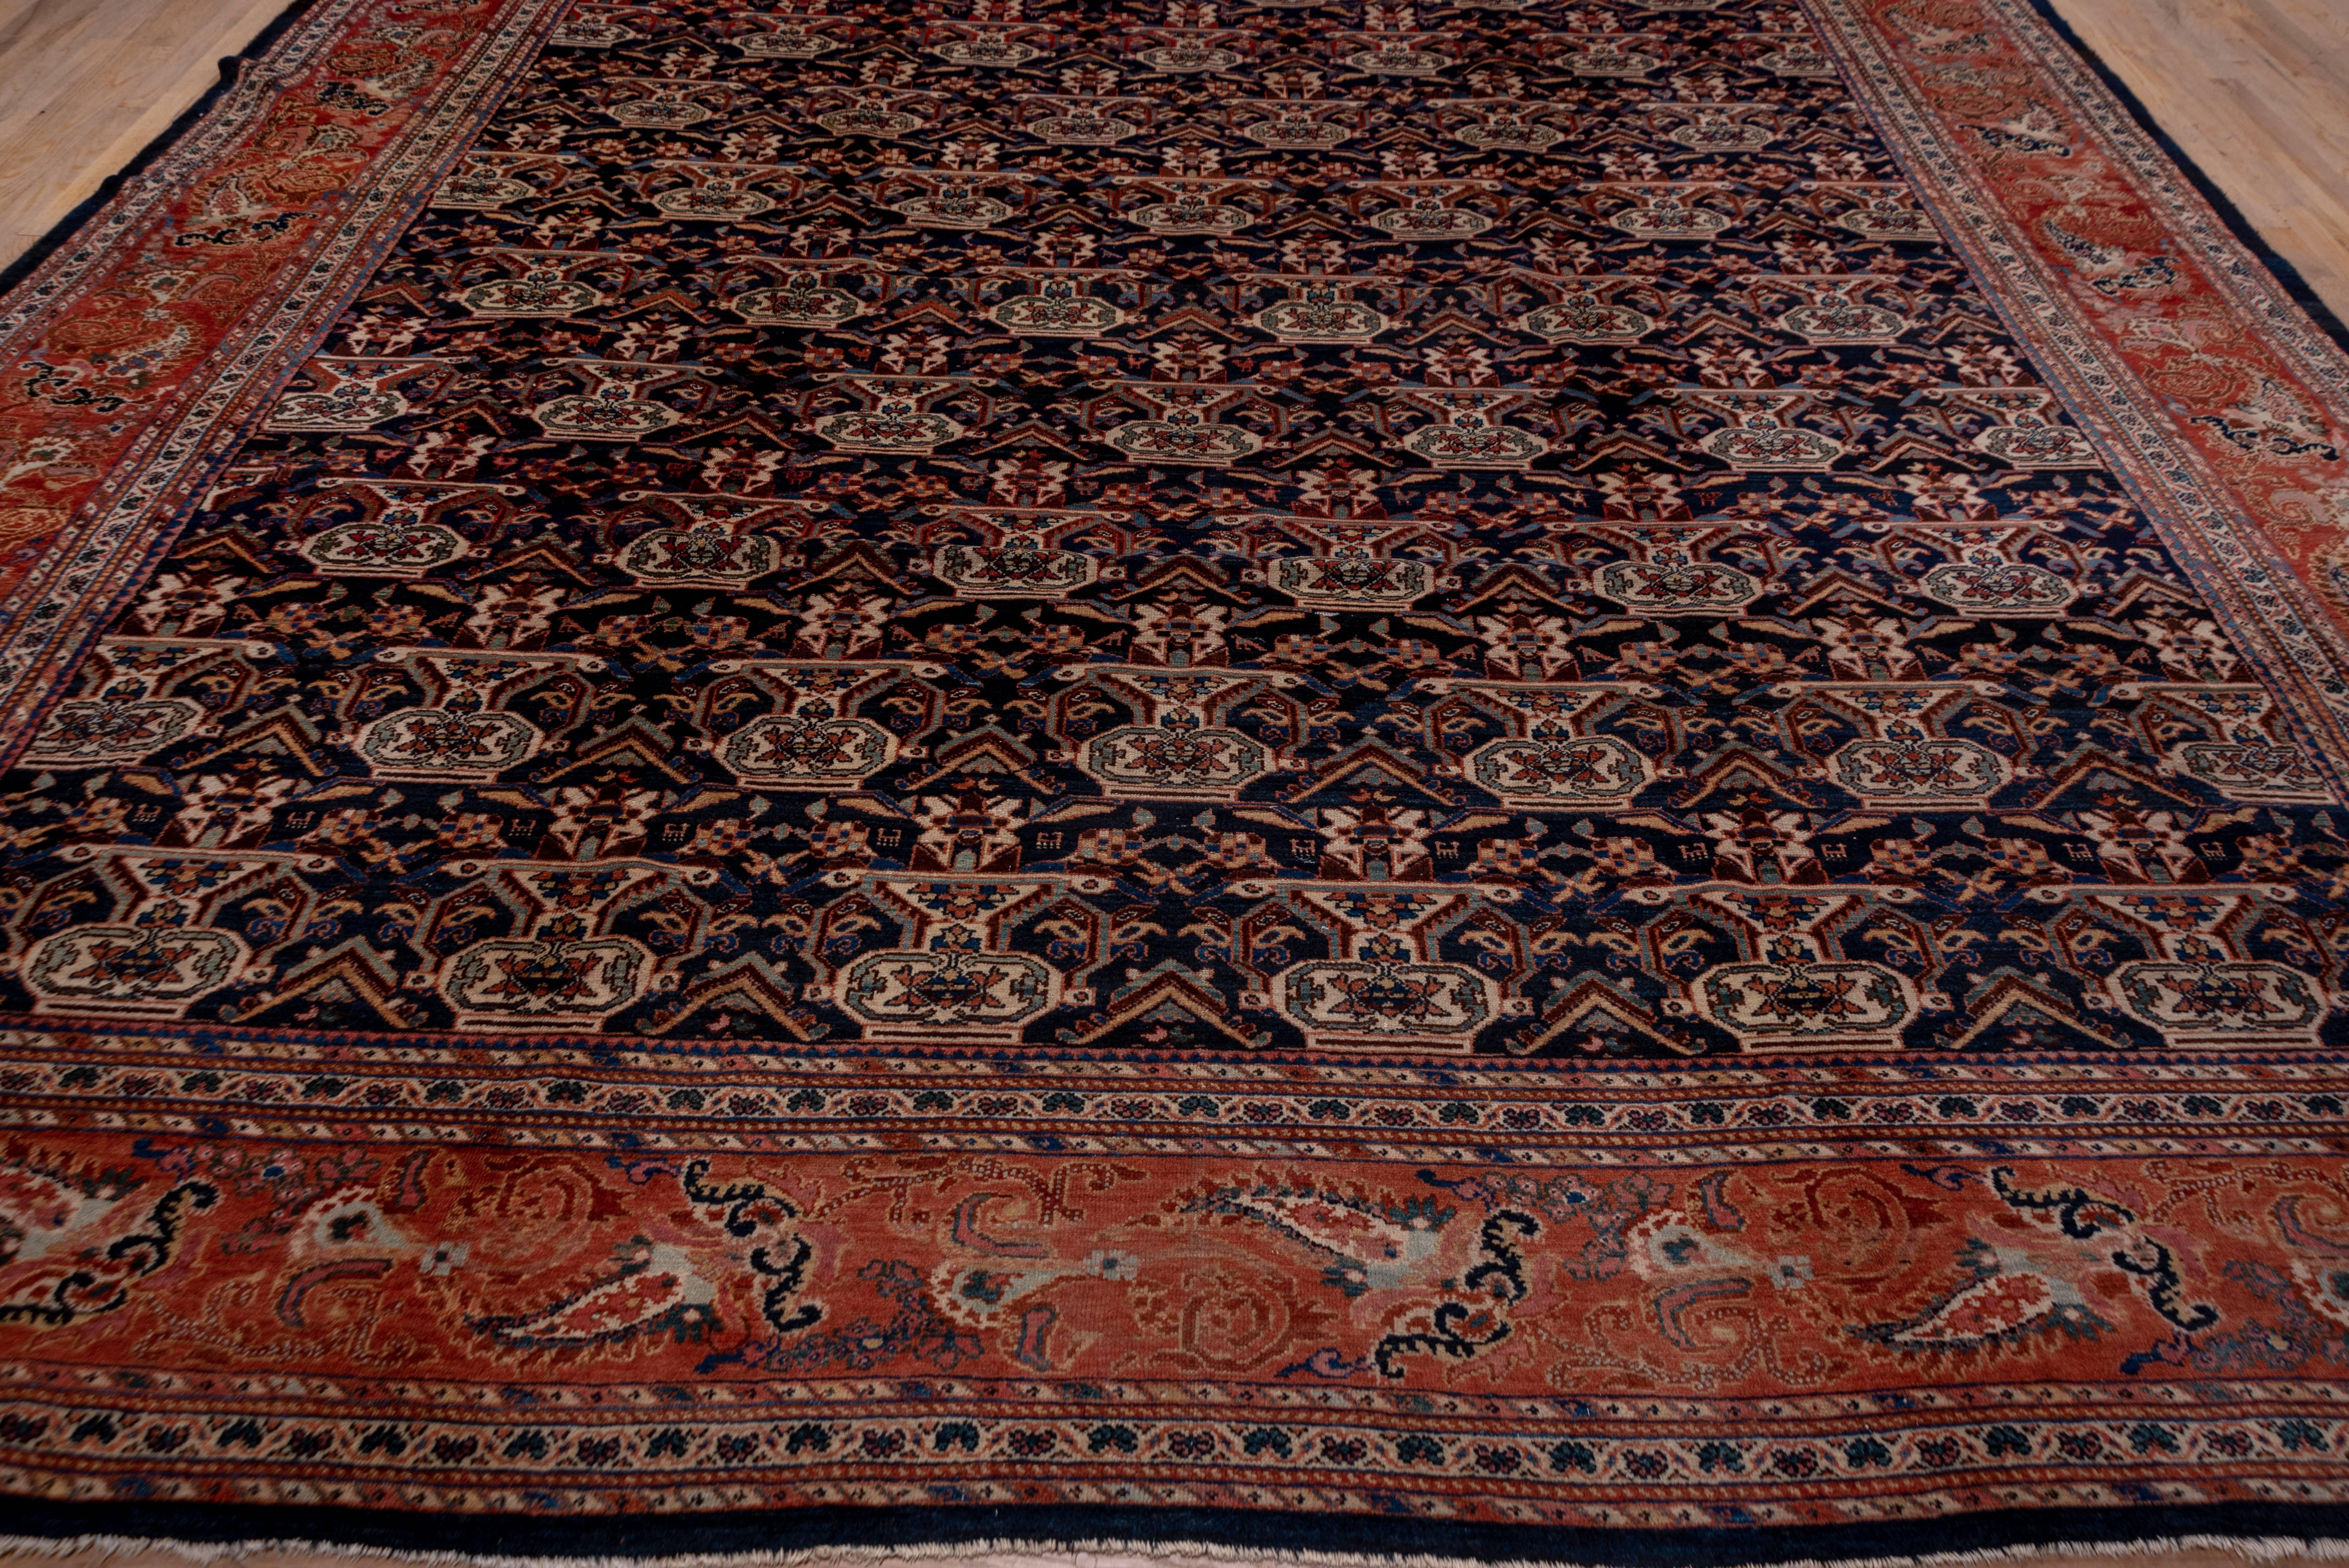 This top condition, full pile western Persian town carpet displays an unusual staggered row vase design on a dark blue ground with details in ivory, green and goldenrod. He rust border shows floriated bottehs derived from European printed textiles.